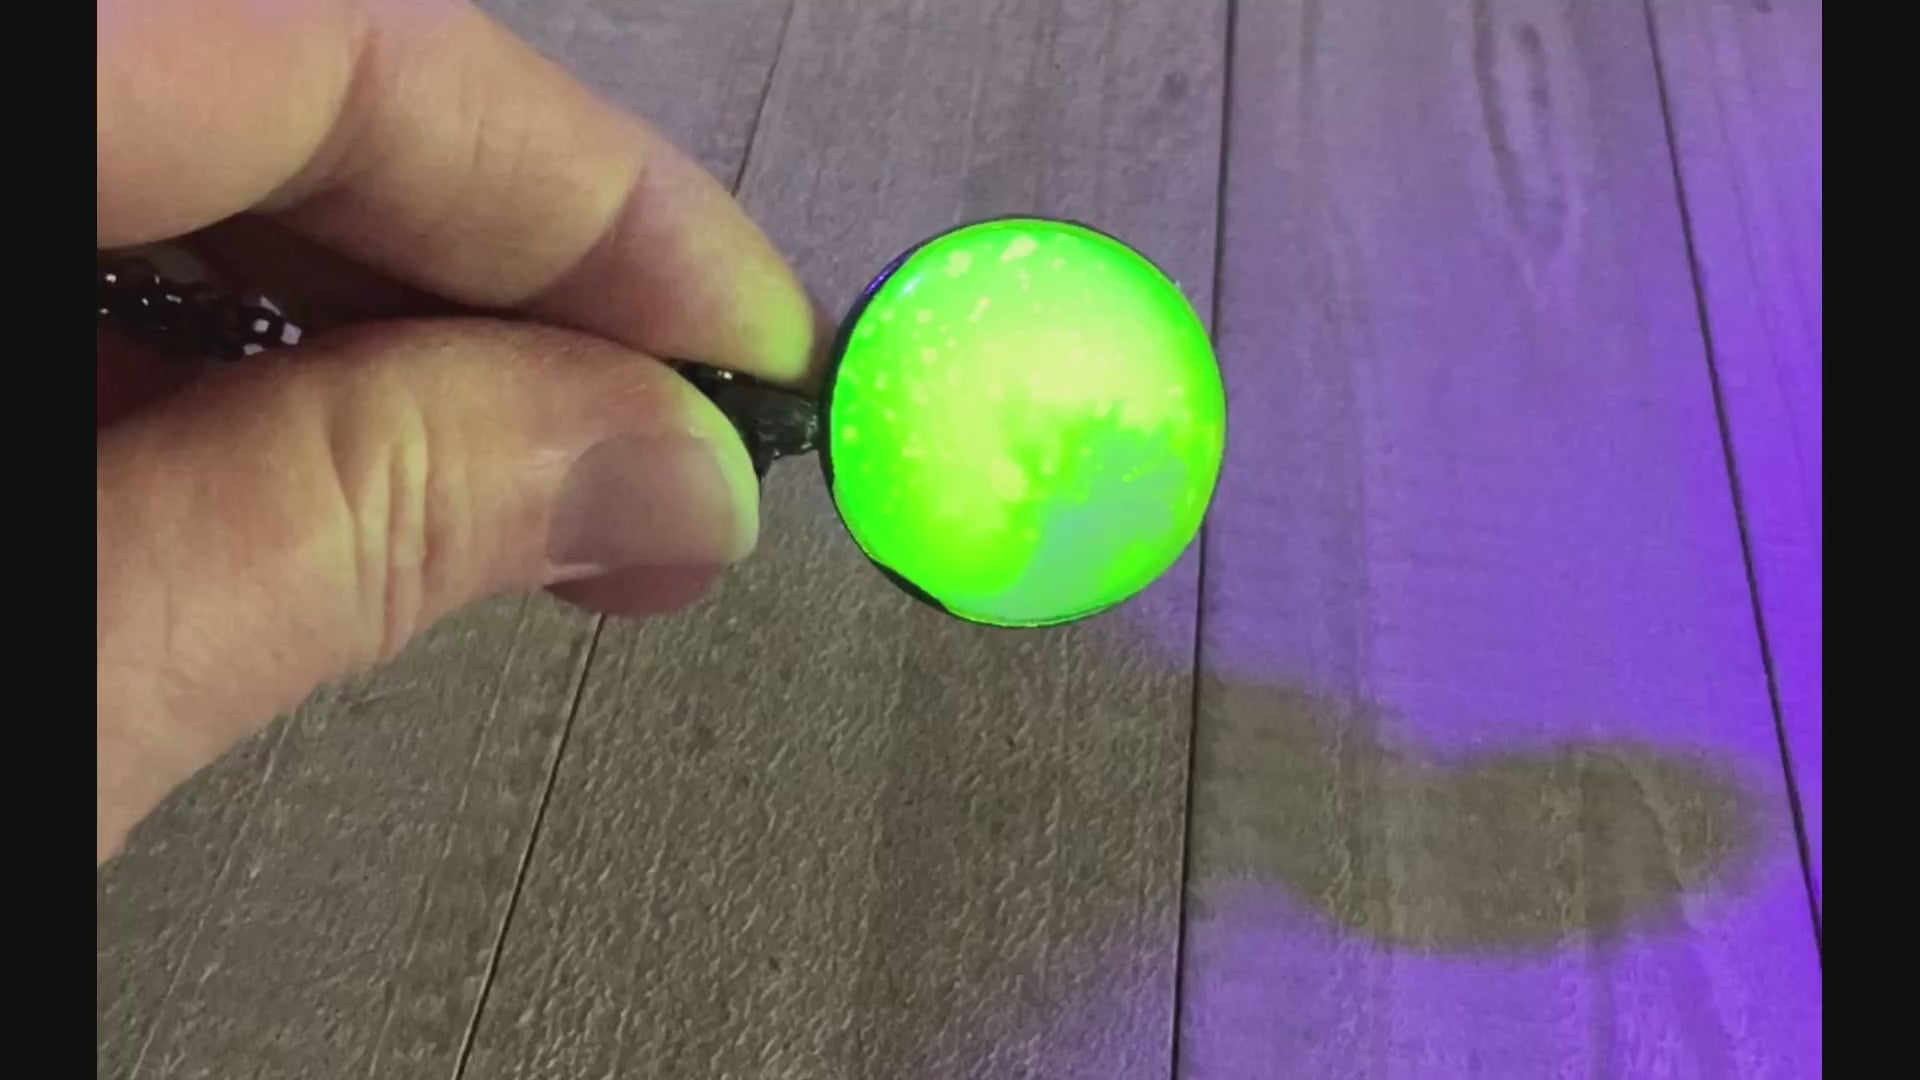 Video showing the neon yellow in the handmade resin pendant fluorescing bright green under a UV black light.